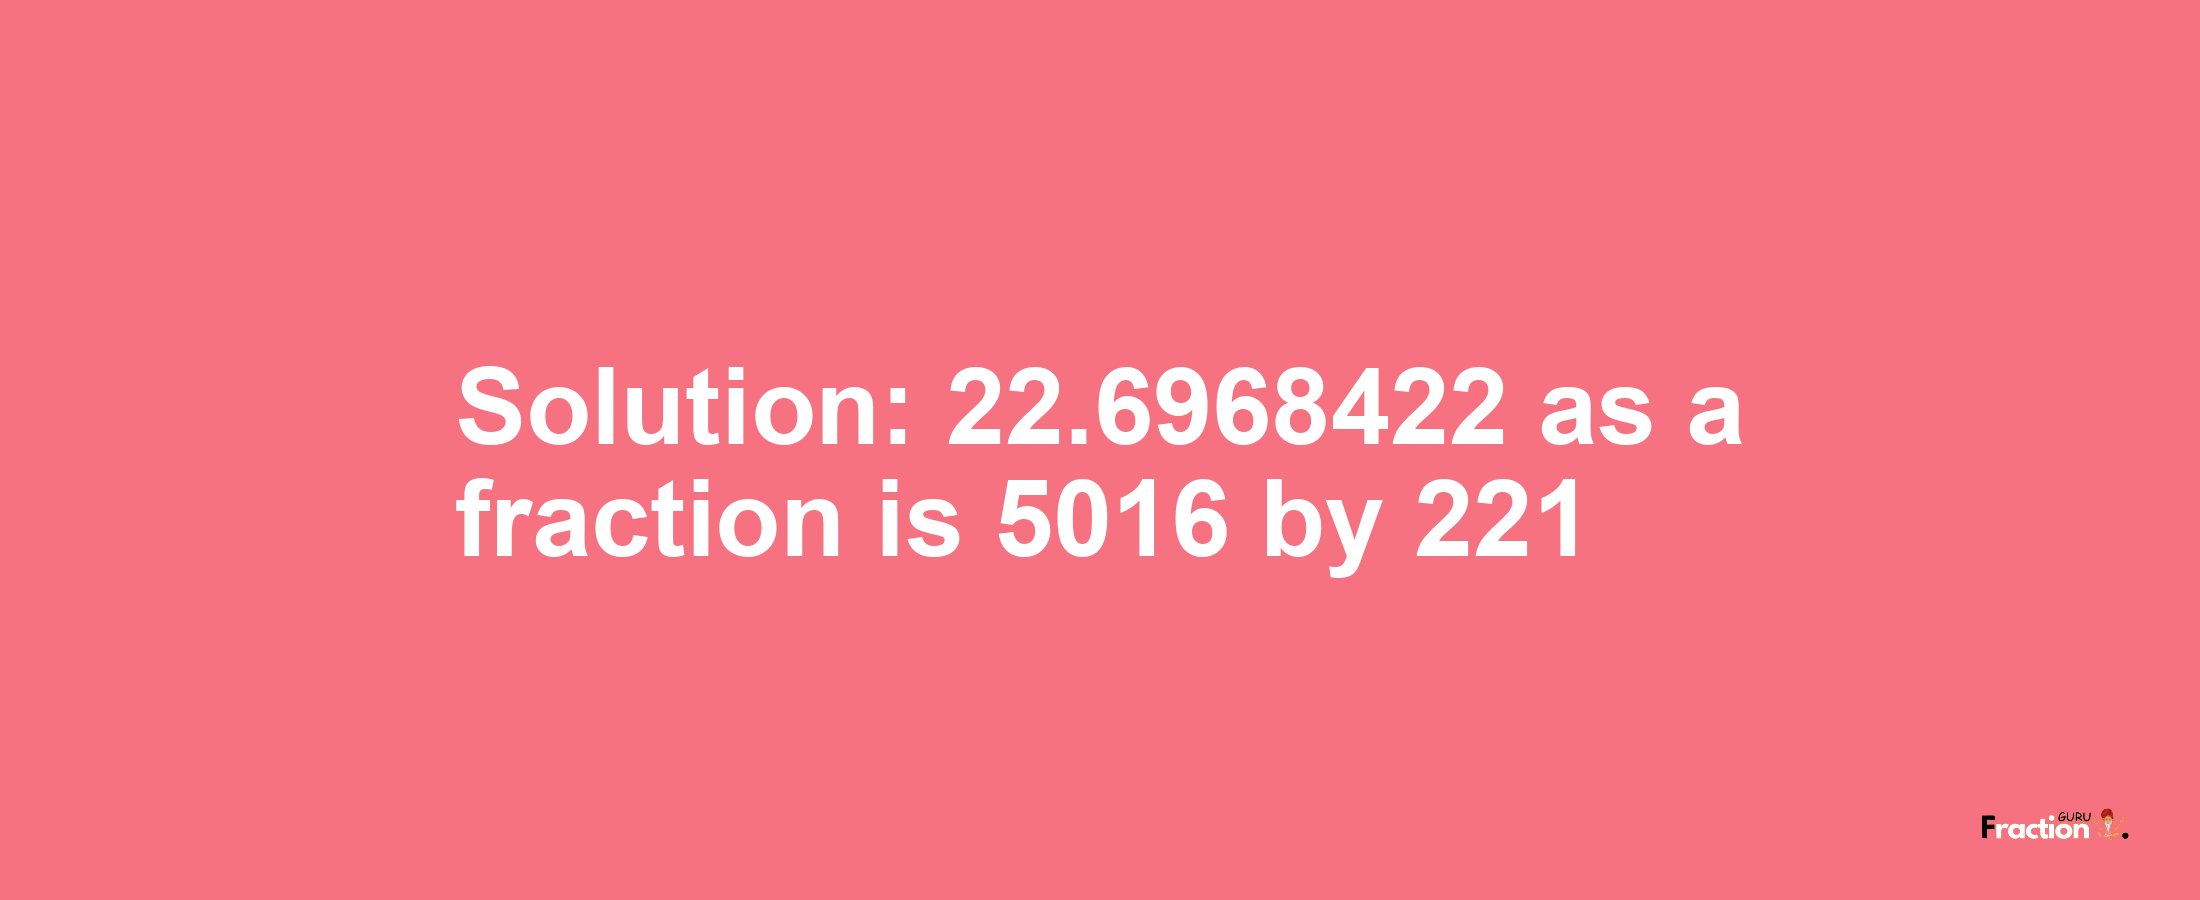 Solution:22.6968422 as a fraction is 5016/221